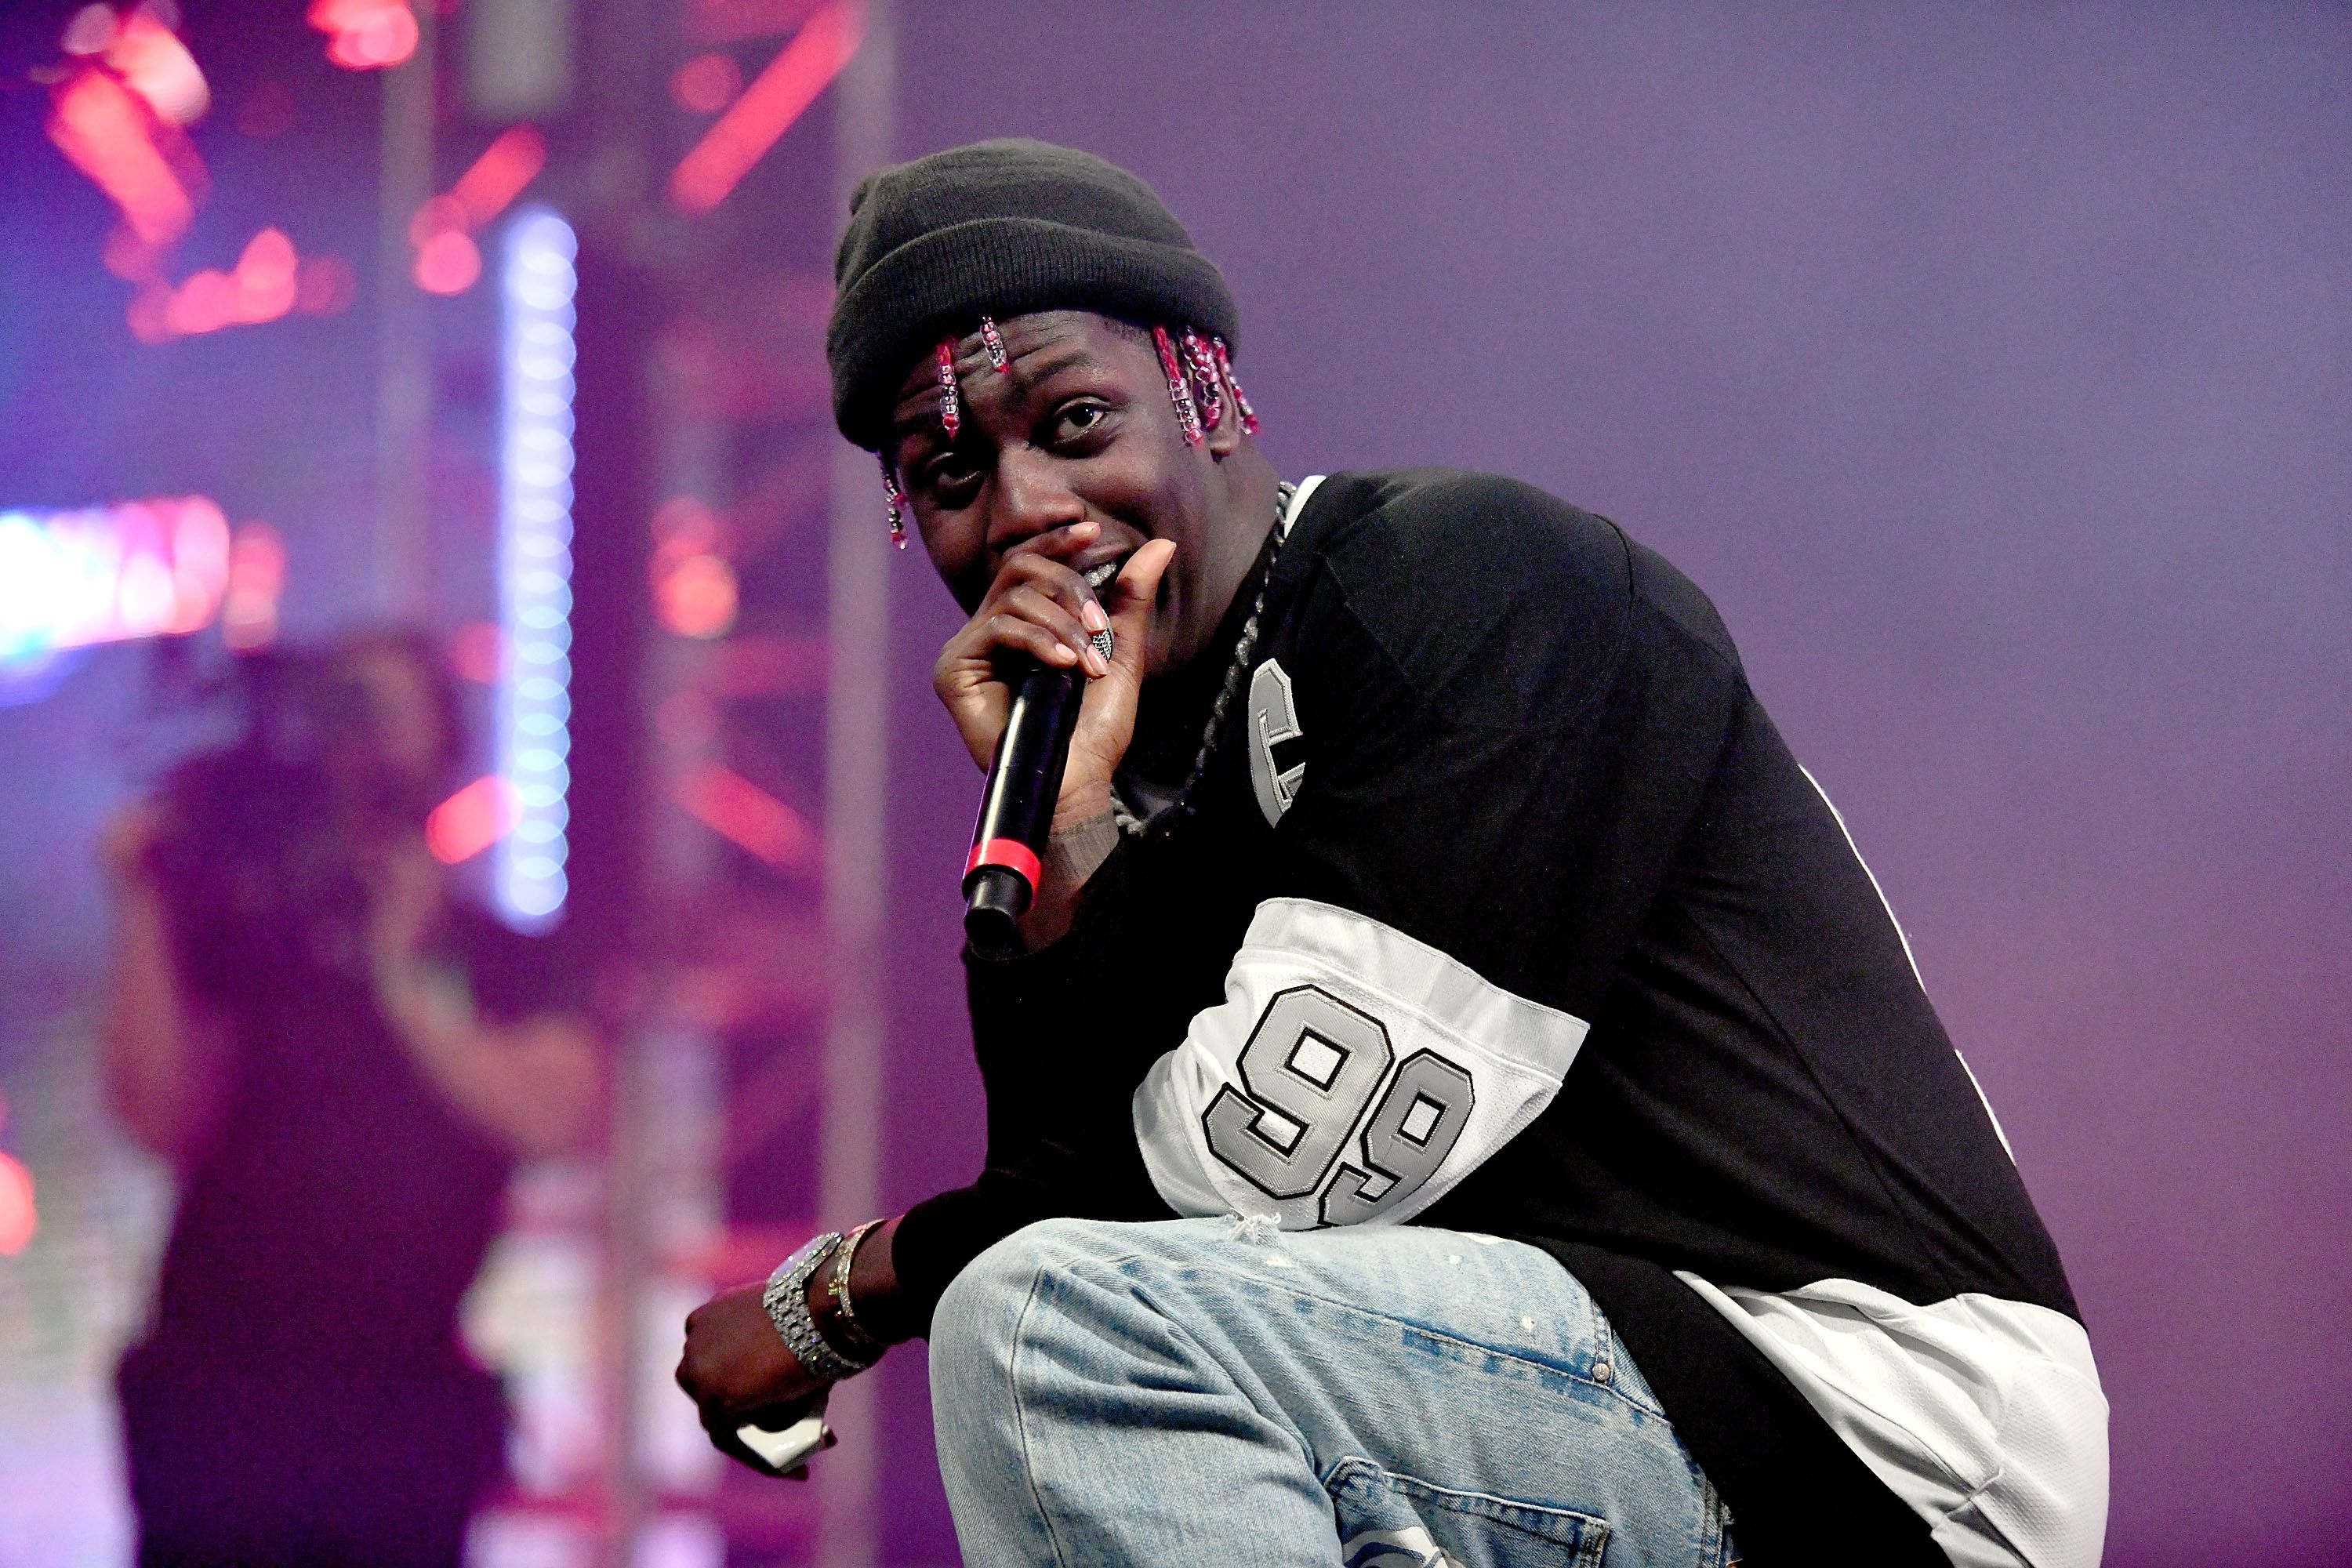 https://hips.hearstapps.com/hmg-prod/images/rapper-lil-yachty-performs-onstage-at-the-rolling-loud-news-photo-894267650-1531924652.jpg